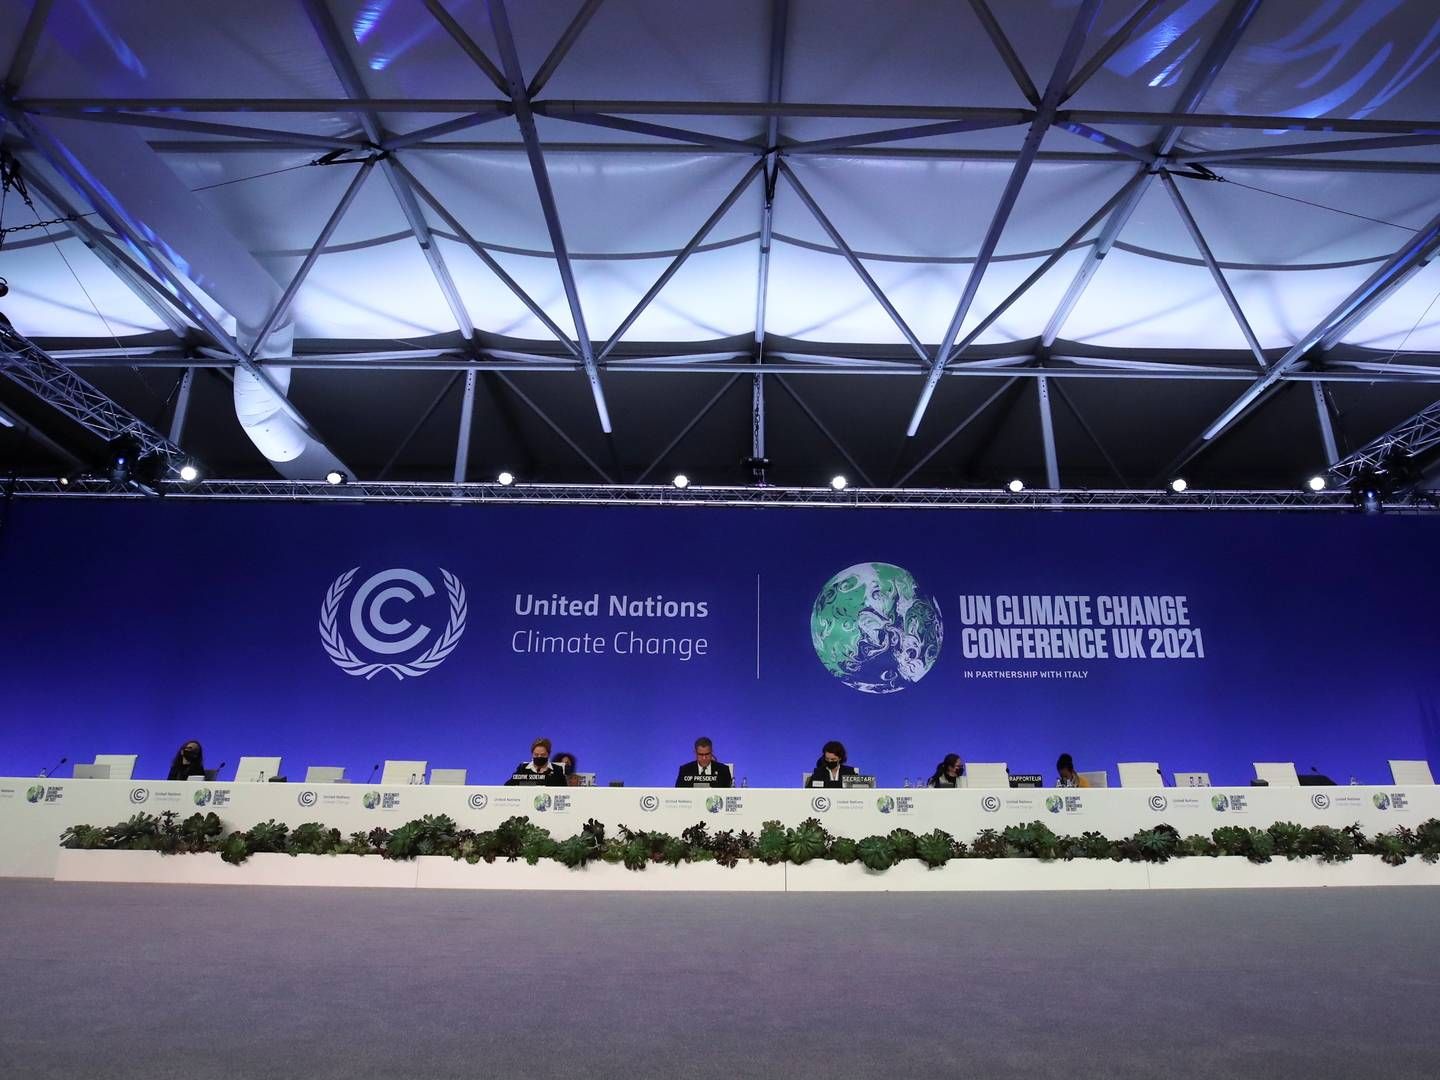 At COP26, LGIM joined 30 financial institutions striving to eliminate agricultural commodity-driven deforestation with a focus on palm oil, soy, beef, pulp and paper from its investment portfolios by 2025. | Photo: Yves Herman/REUTERS / X00380